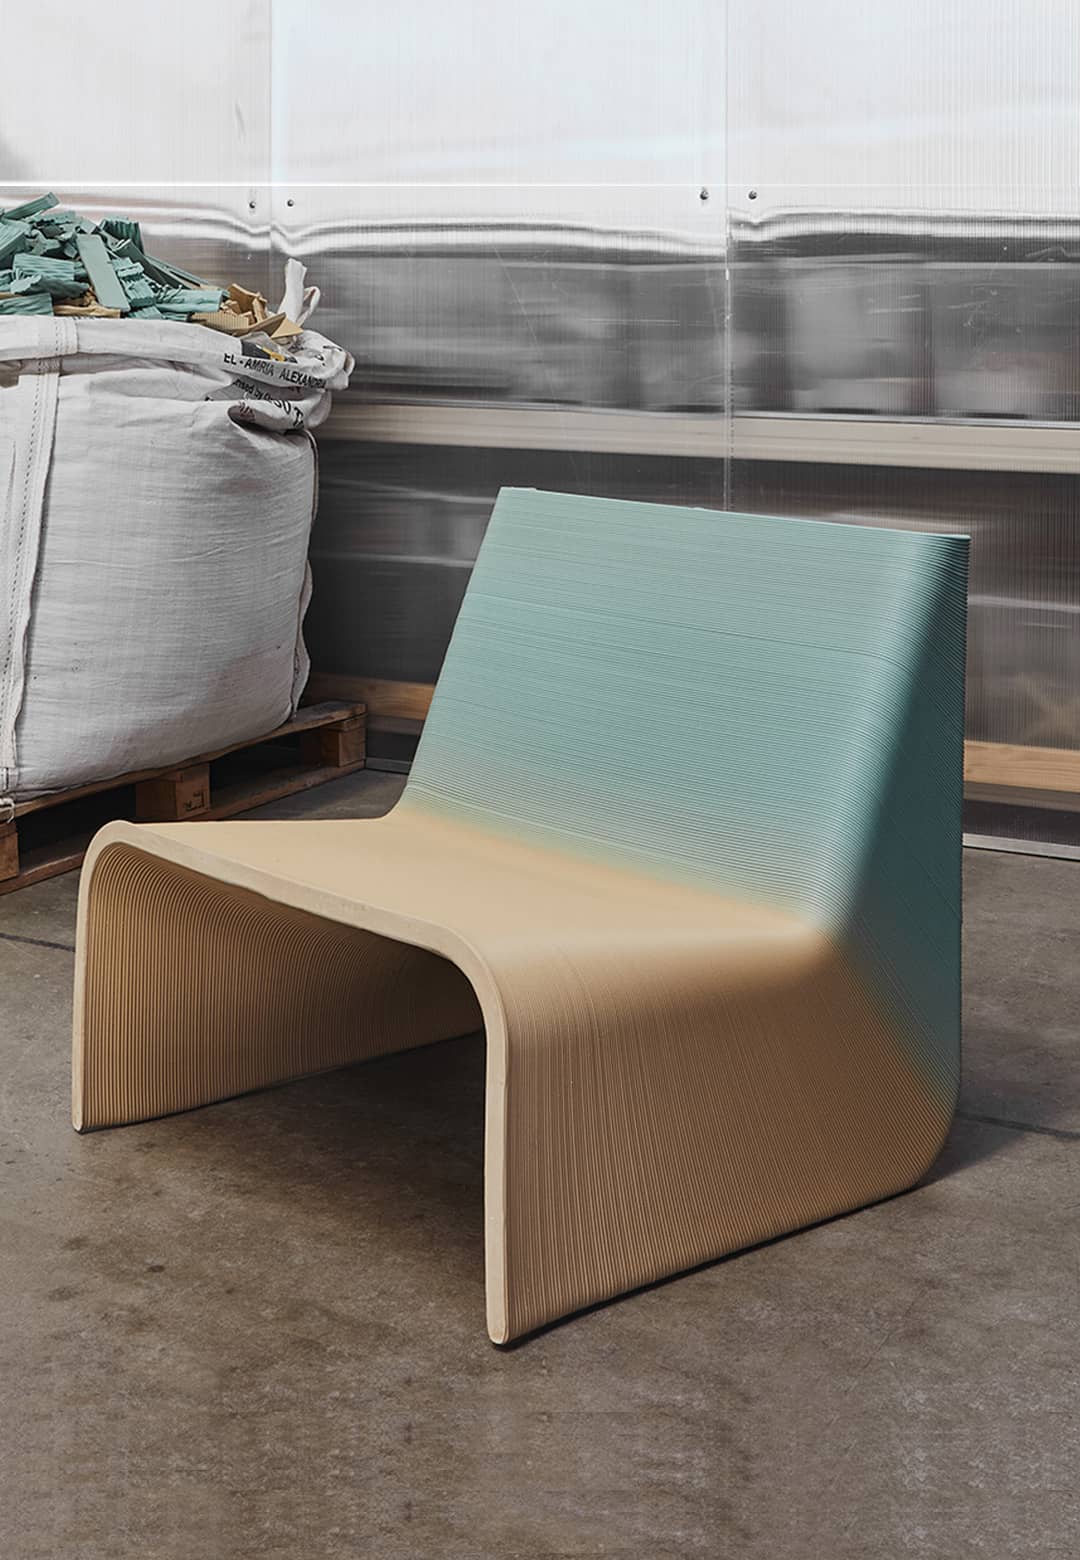 The New Raw turns plastic waste into limited edition chairs